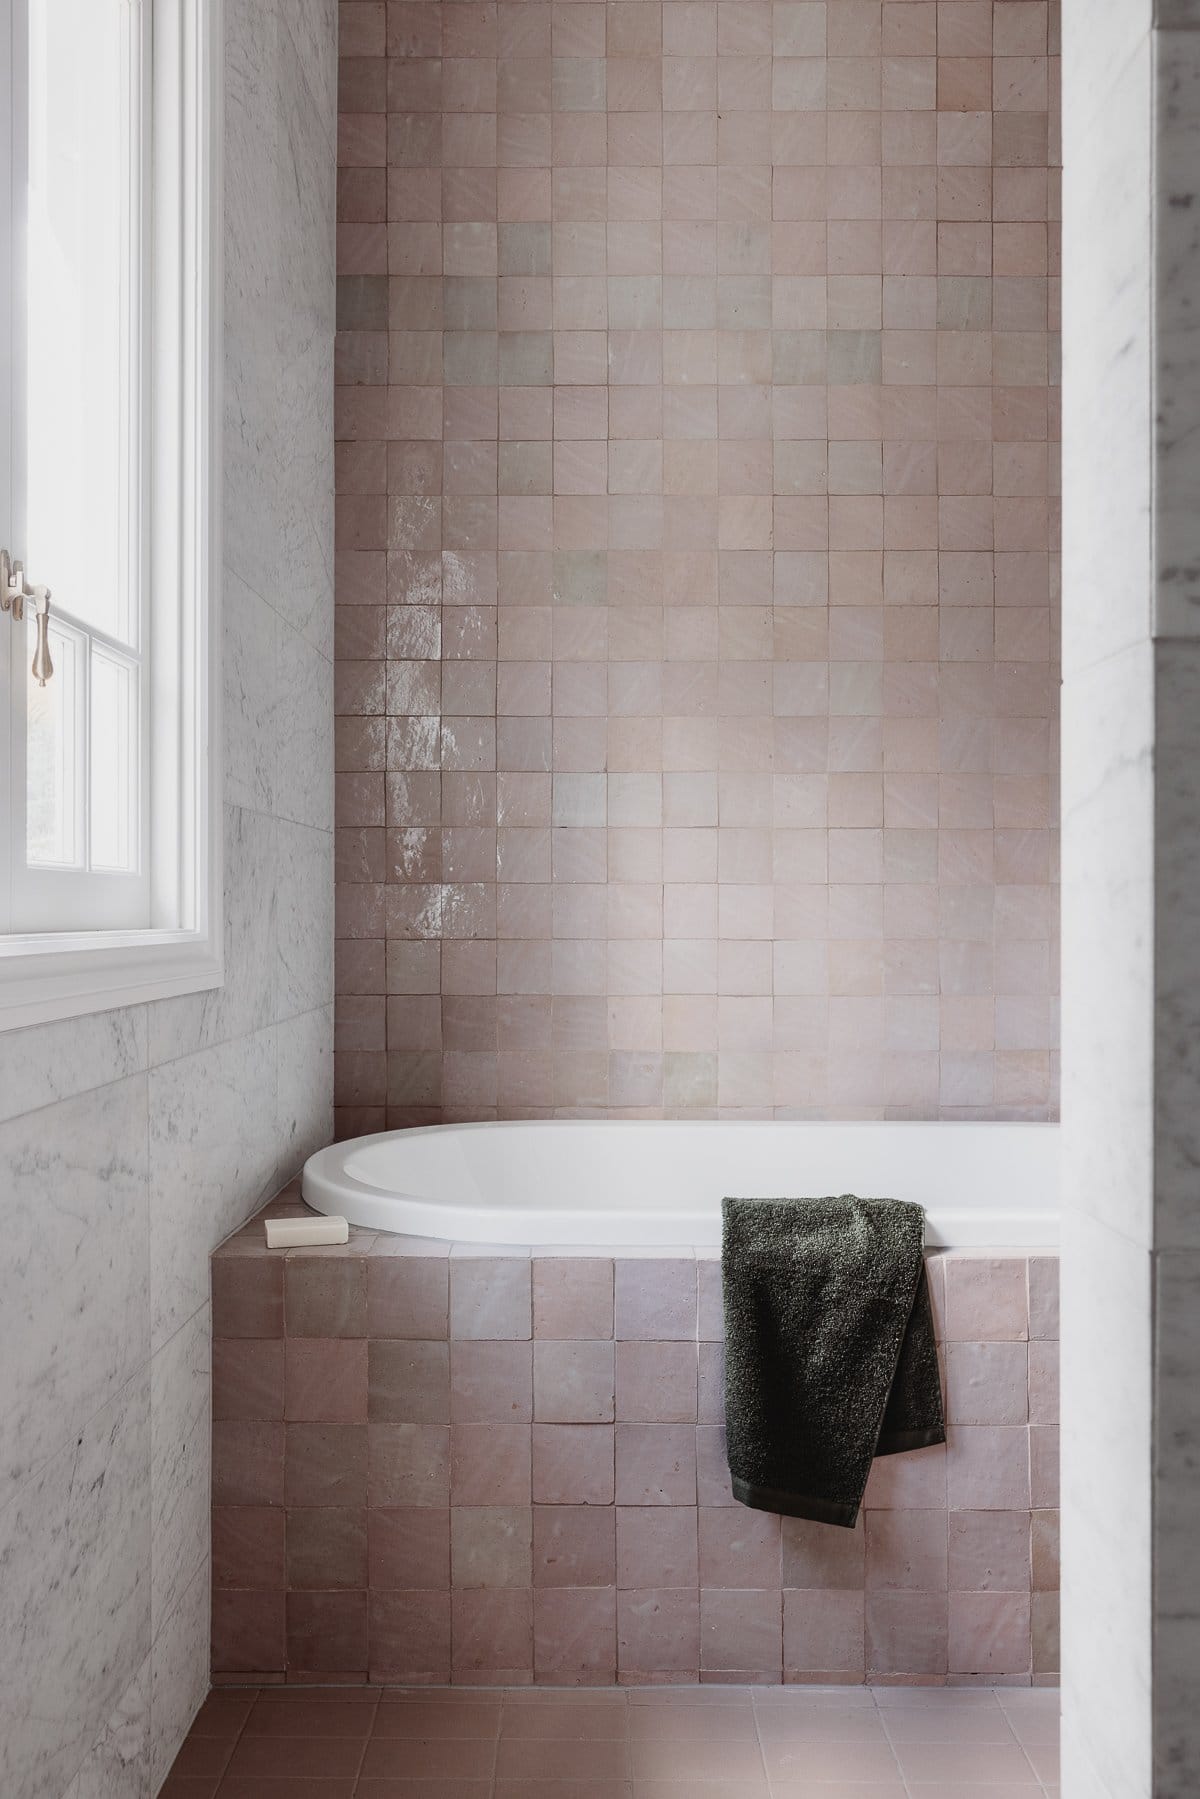 Hazlewood House by Favell Architects. Photography by Andy Macpherson. Bath surrounded by pink tiles. White marble tiles on wall and pink tiles on floor and wall behind bath.